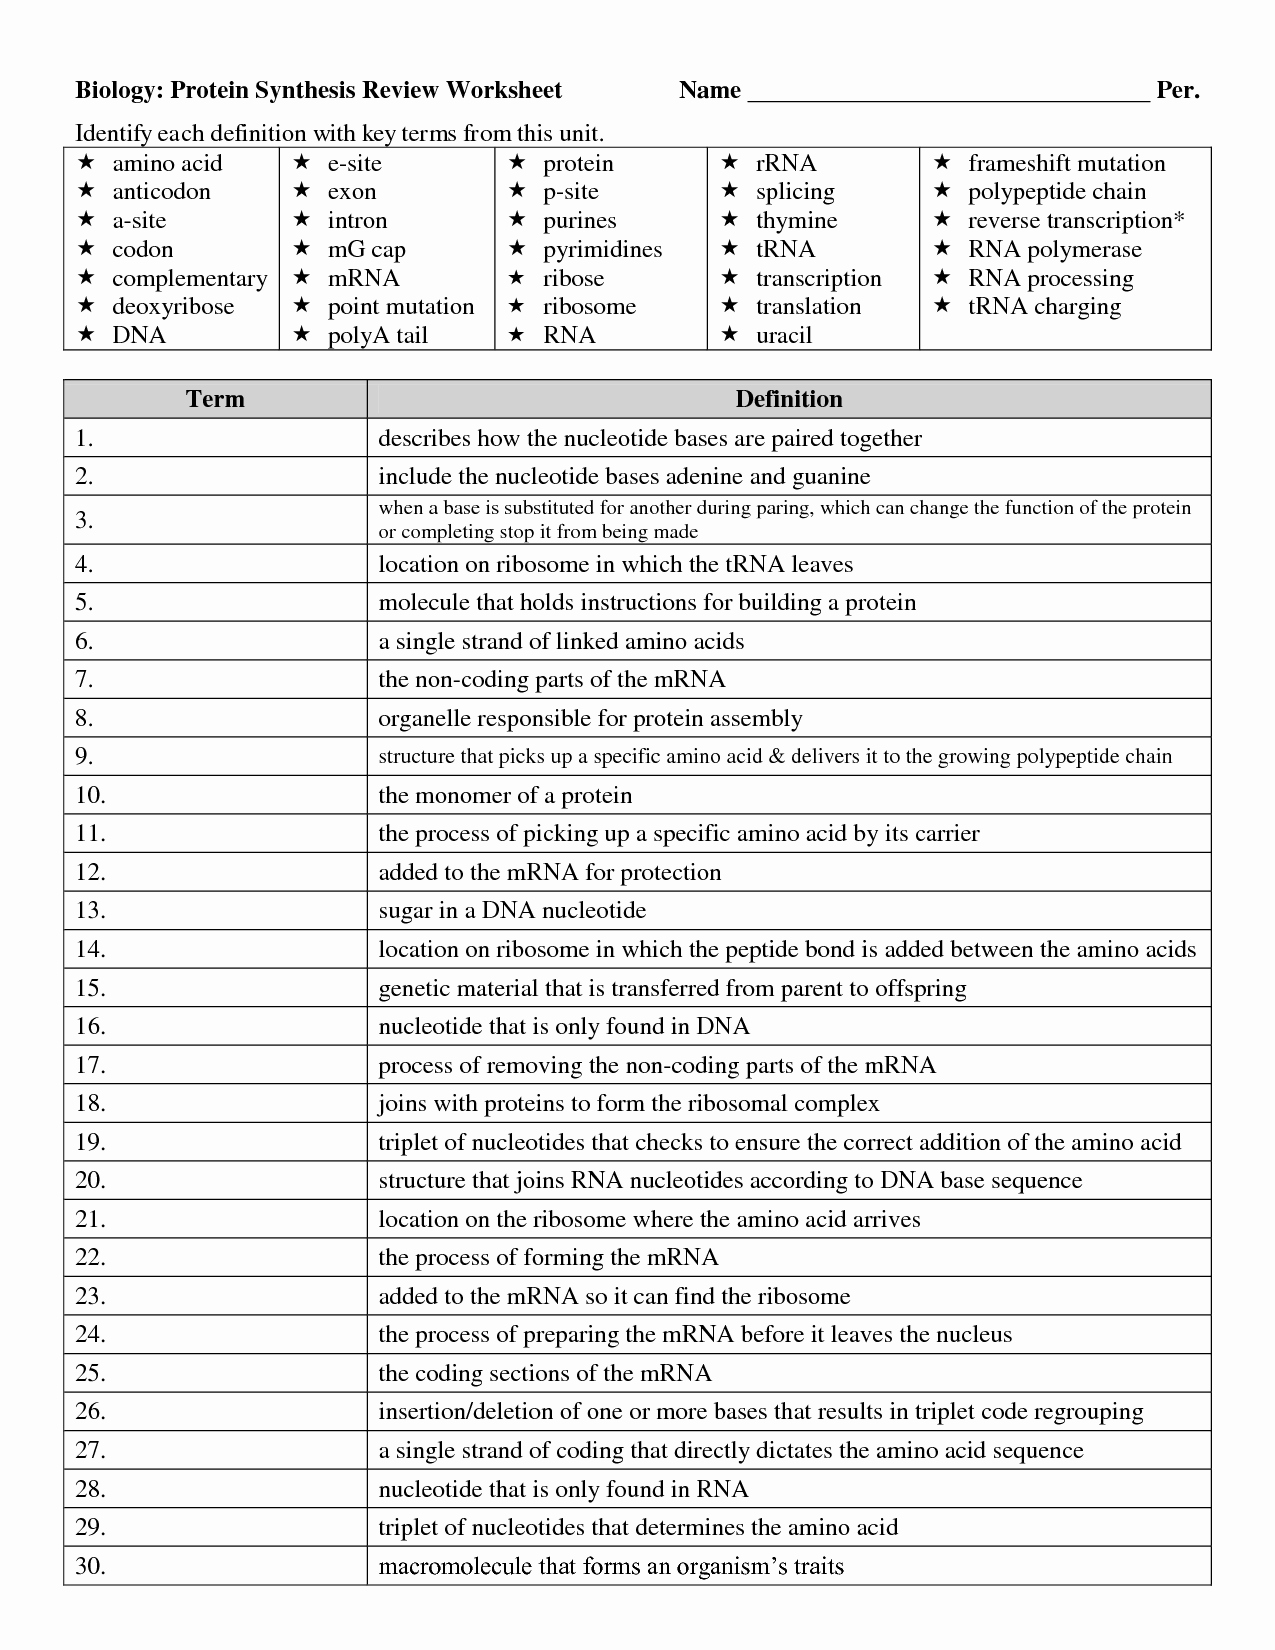 Dna and Rna Worksheet Answers Awesome 16 Best Of Dna and Rna Protein Synthesis Worksheet